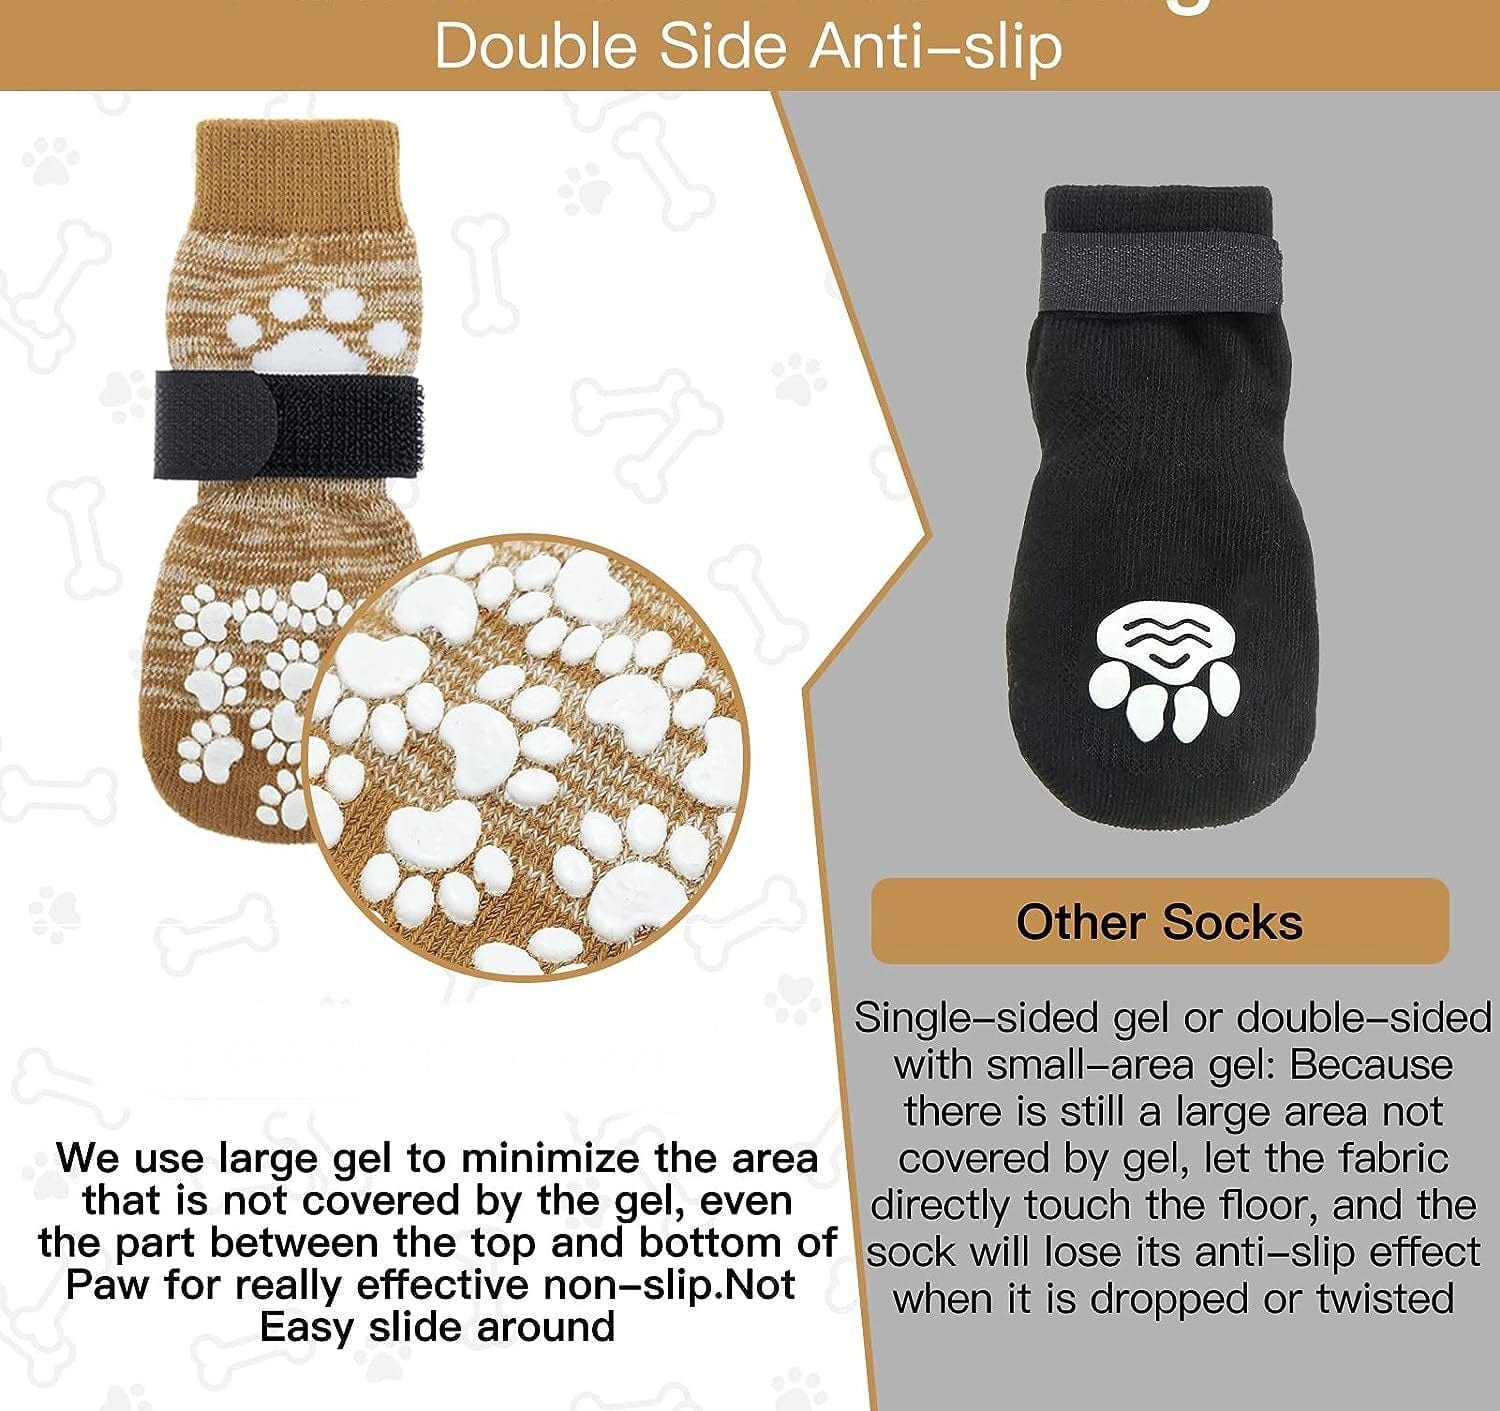 KUTKUT Double Side Anti-Slip Dog Socks with Adjustable Straps - Warm Strong Traction Control for Indoor on Hardwood Floor Wear Soft and Comfortable Paw Protector for Small Medium Dogs - kutku